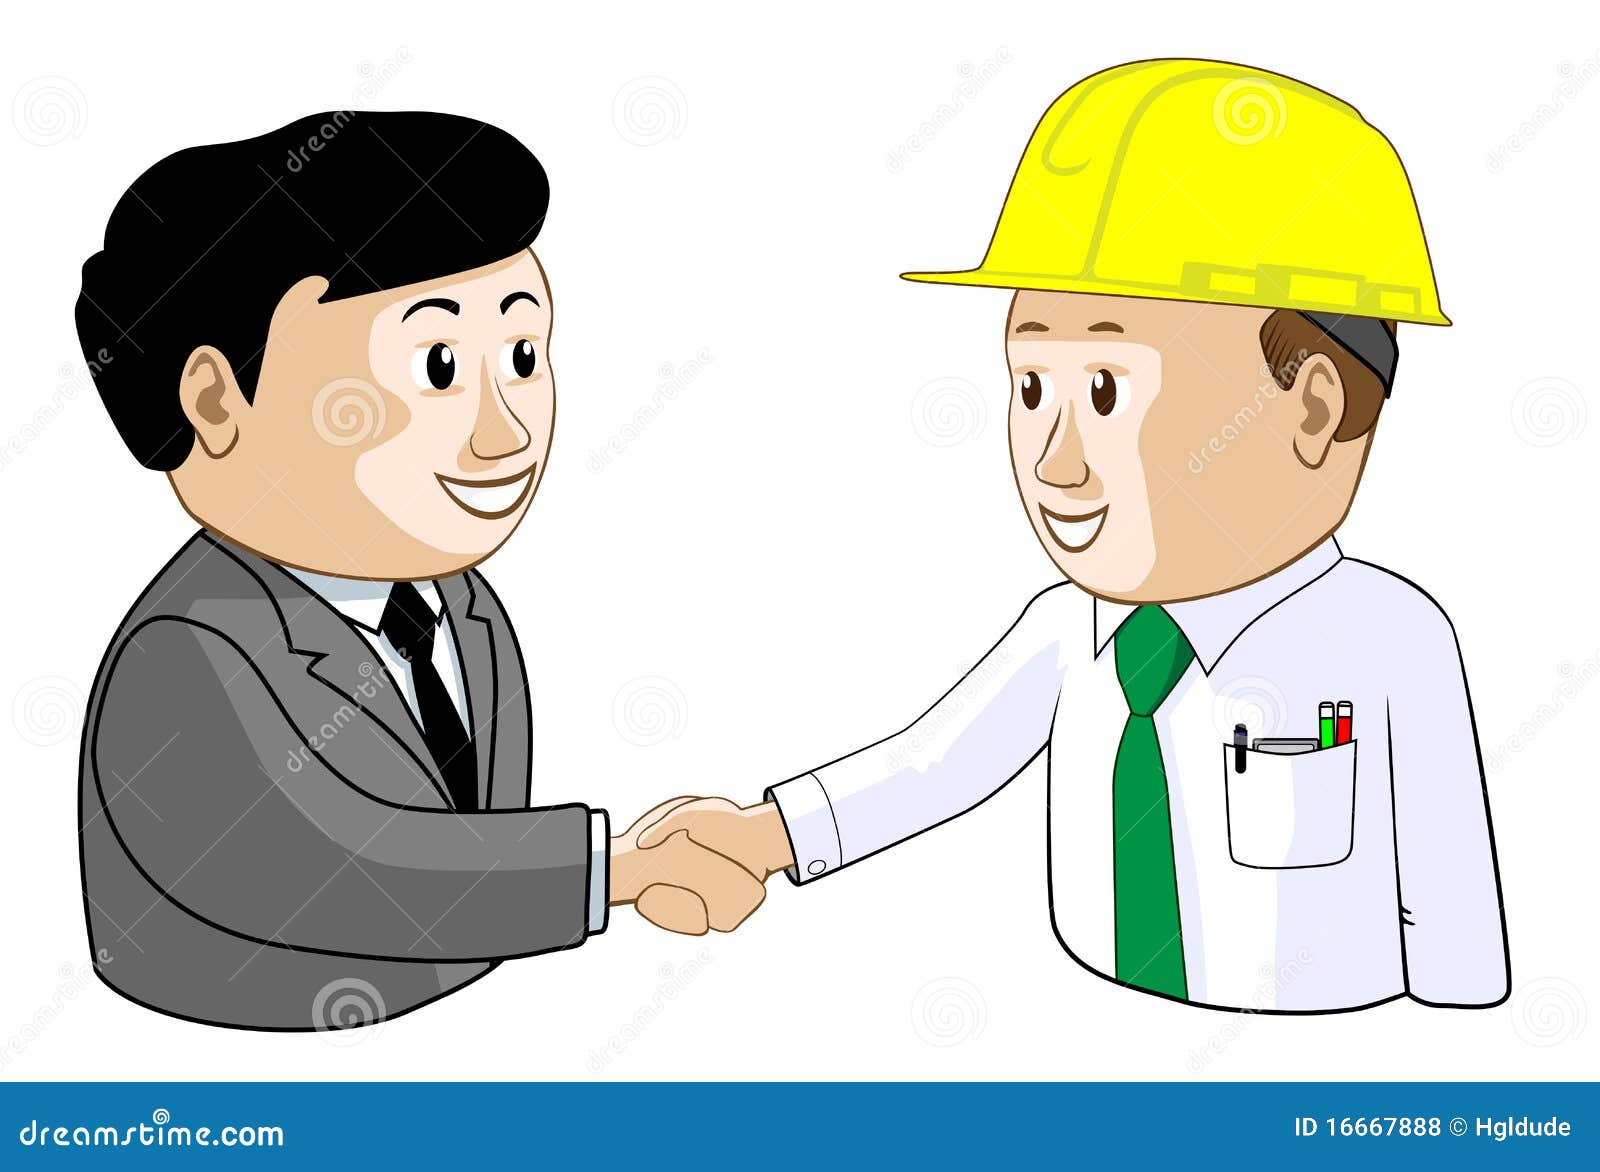 clipart business engineer - photo #10